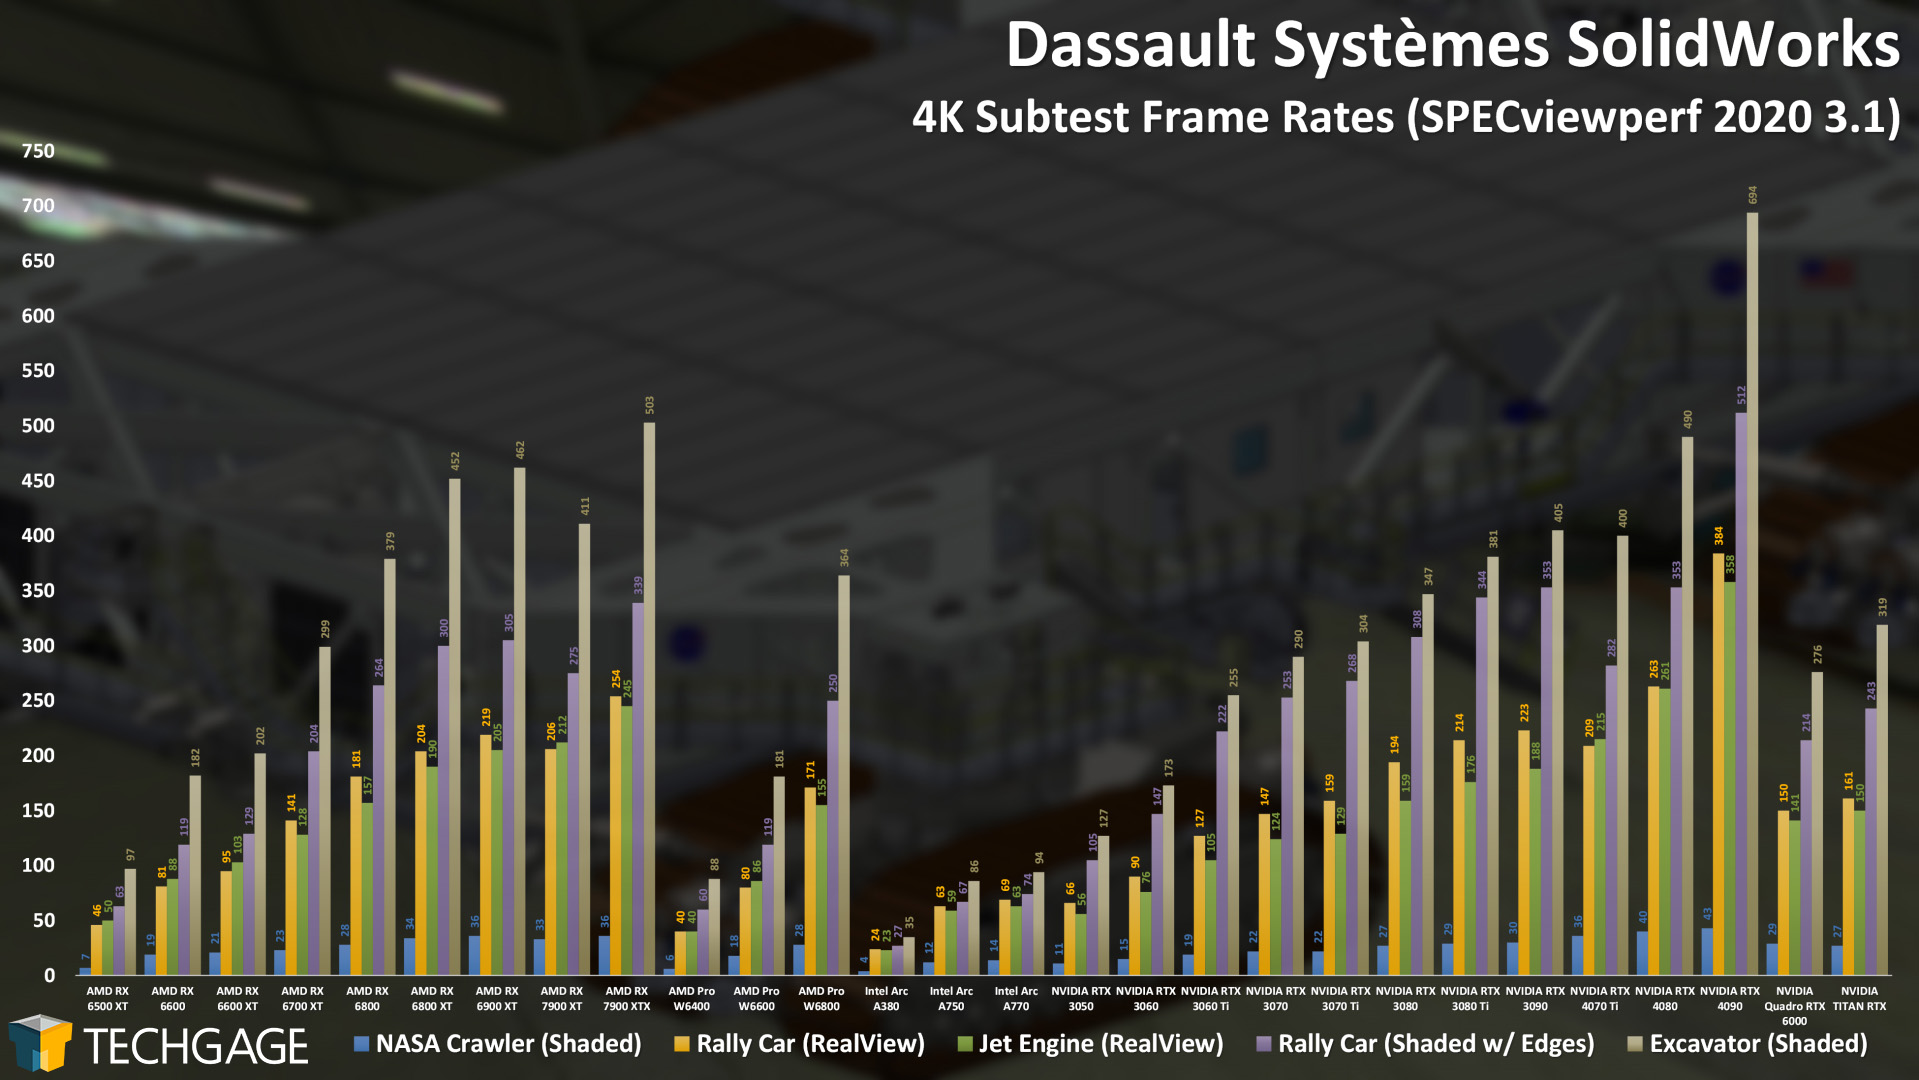 Dassault Systemes SolidWorks - 2160p Viewport Performance (Subtests)